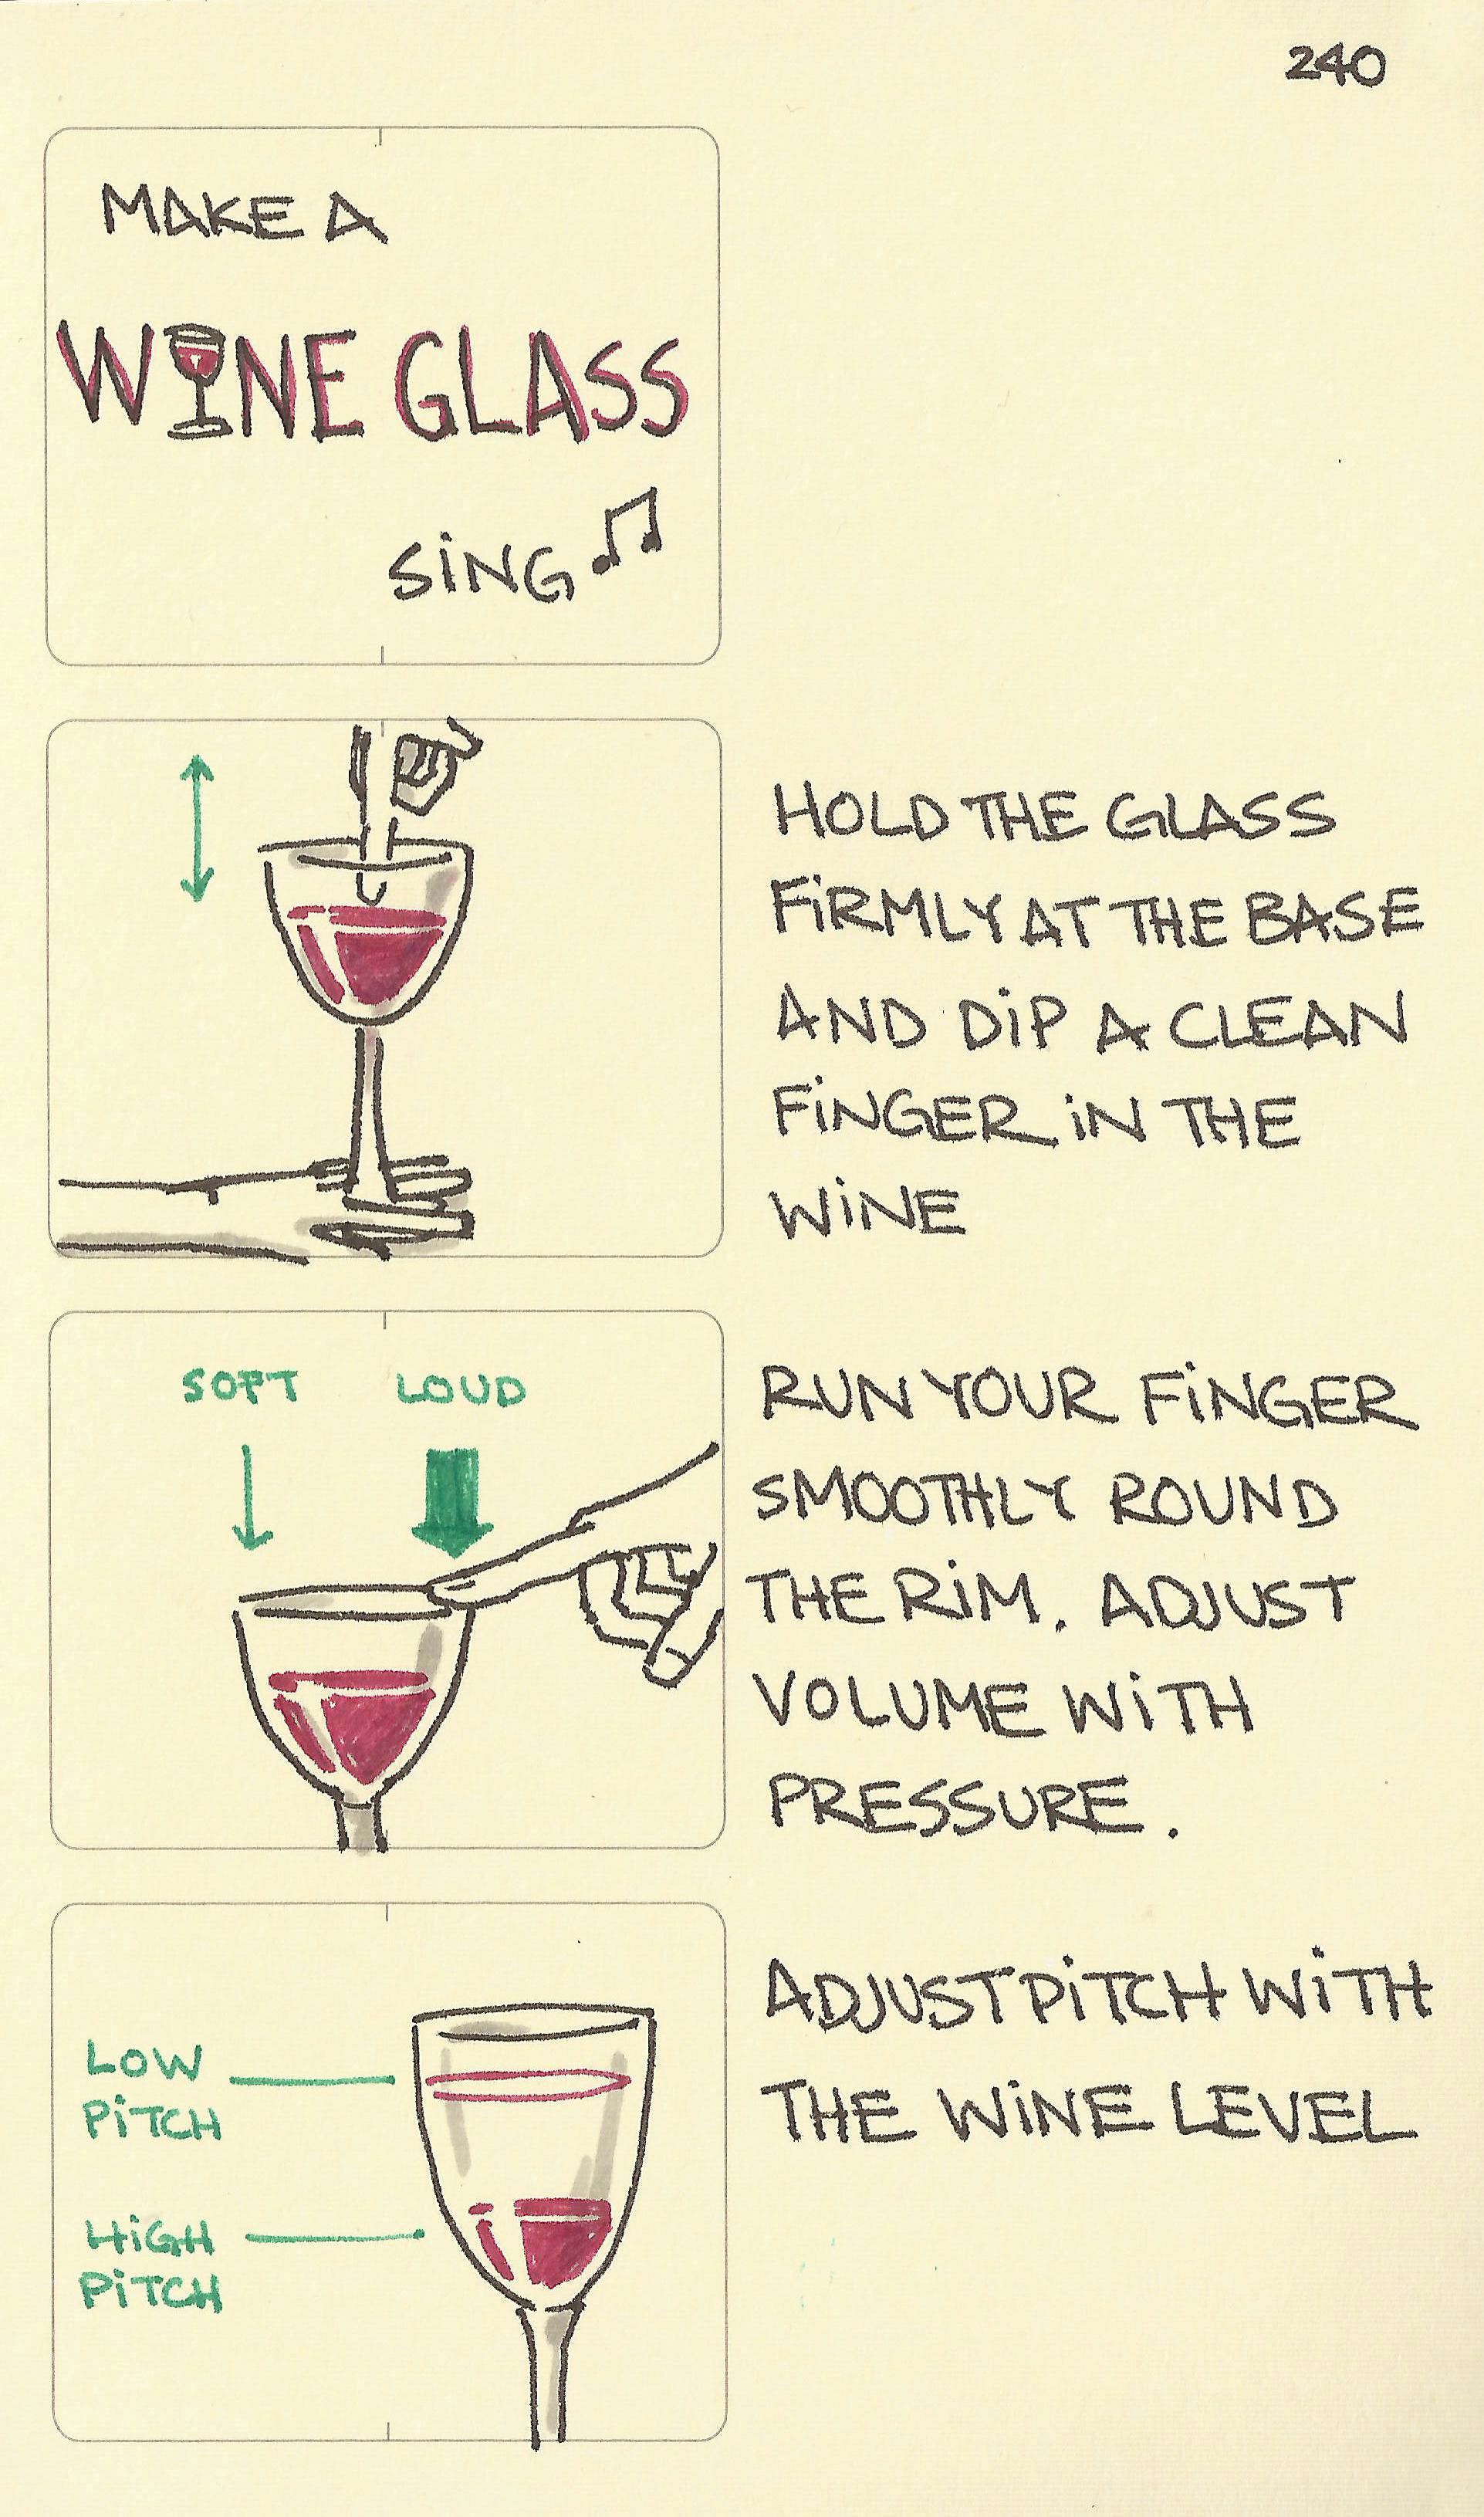 Make a wine glass sing - Sketchplanations